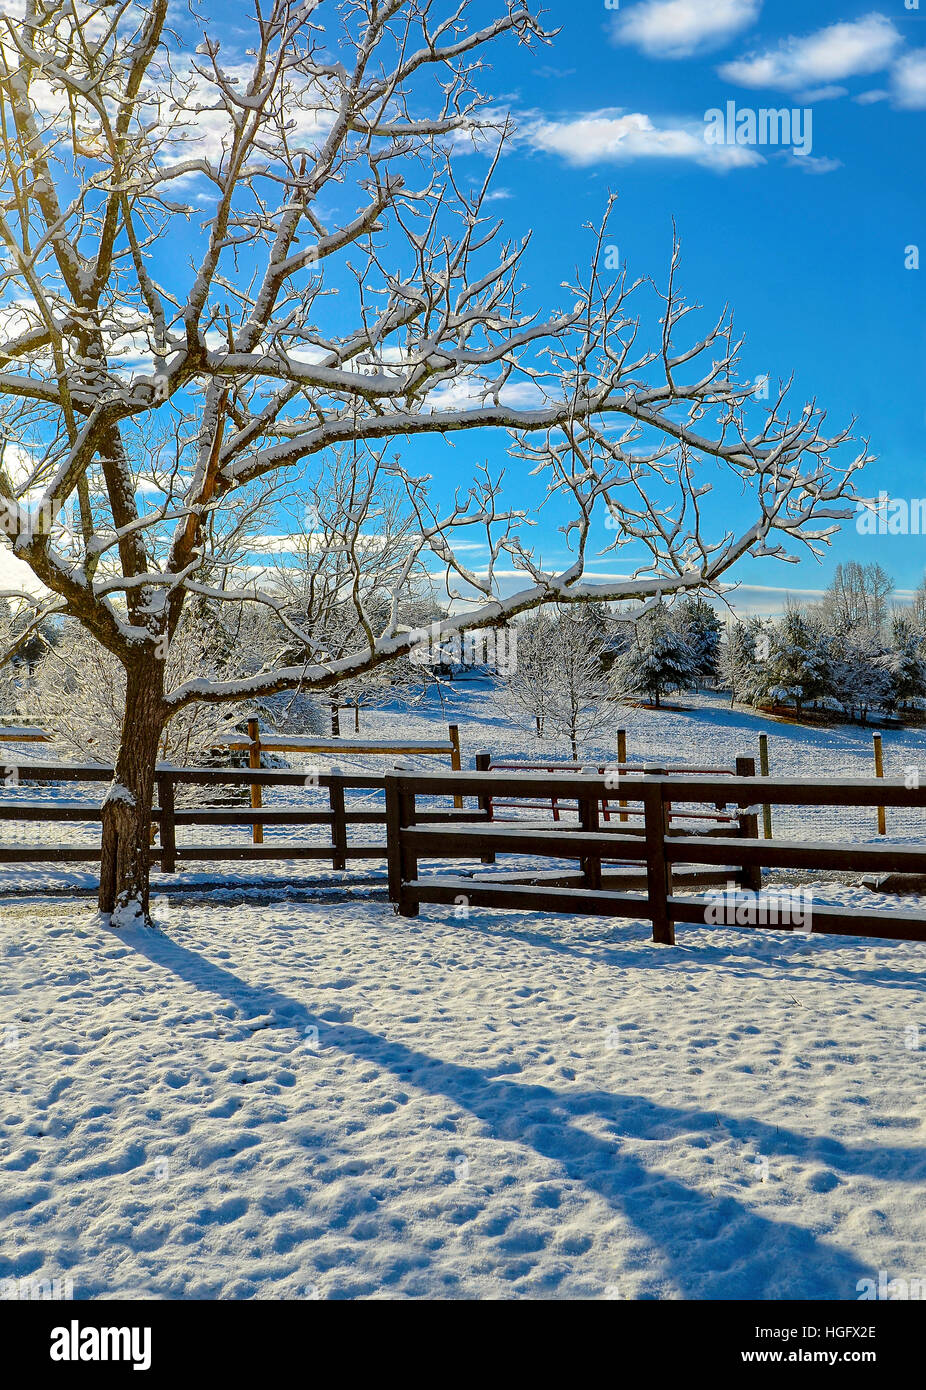 A beautiful winter morning, the sun is shining and making shadows on the snow in a fenced in pasture area. Stock Photo